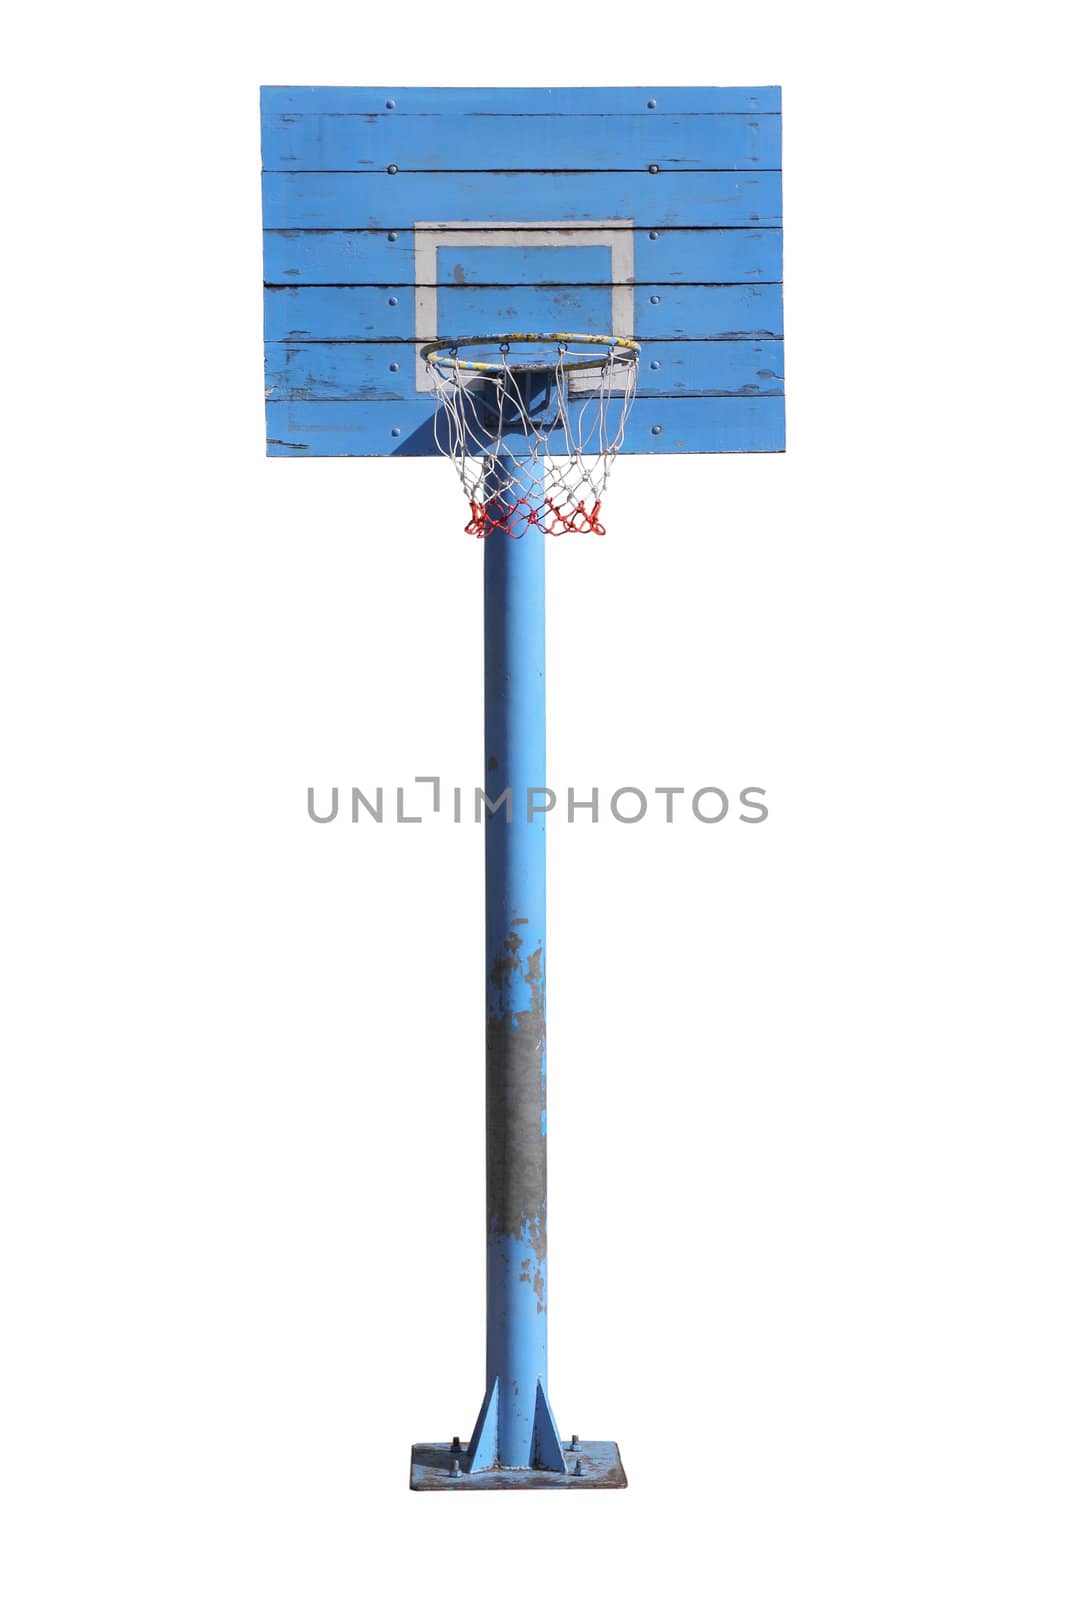 Outdoor basketball hoop on white background